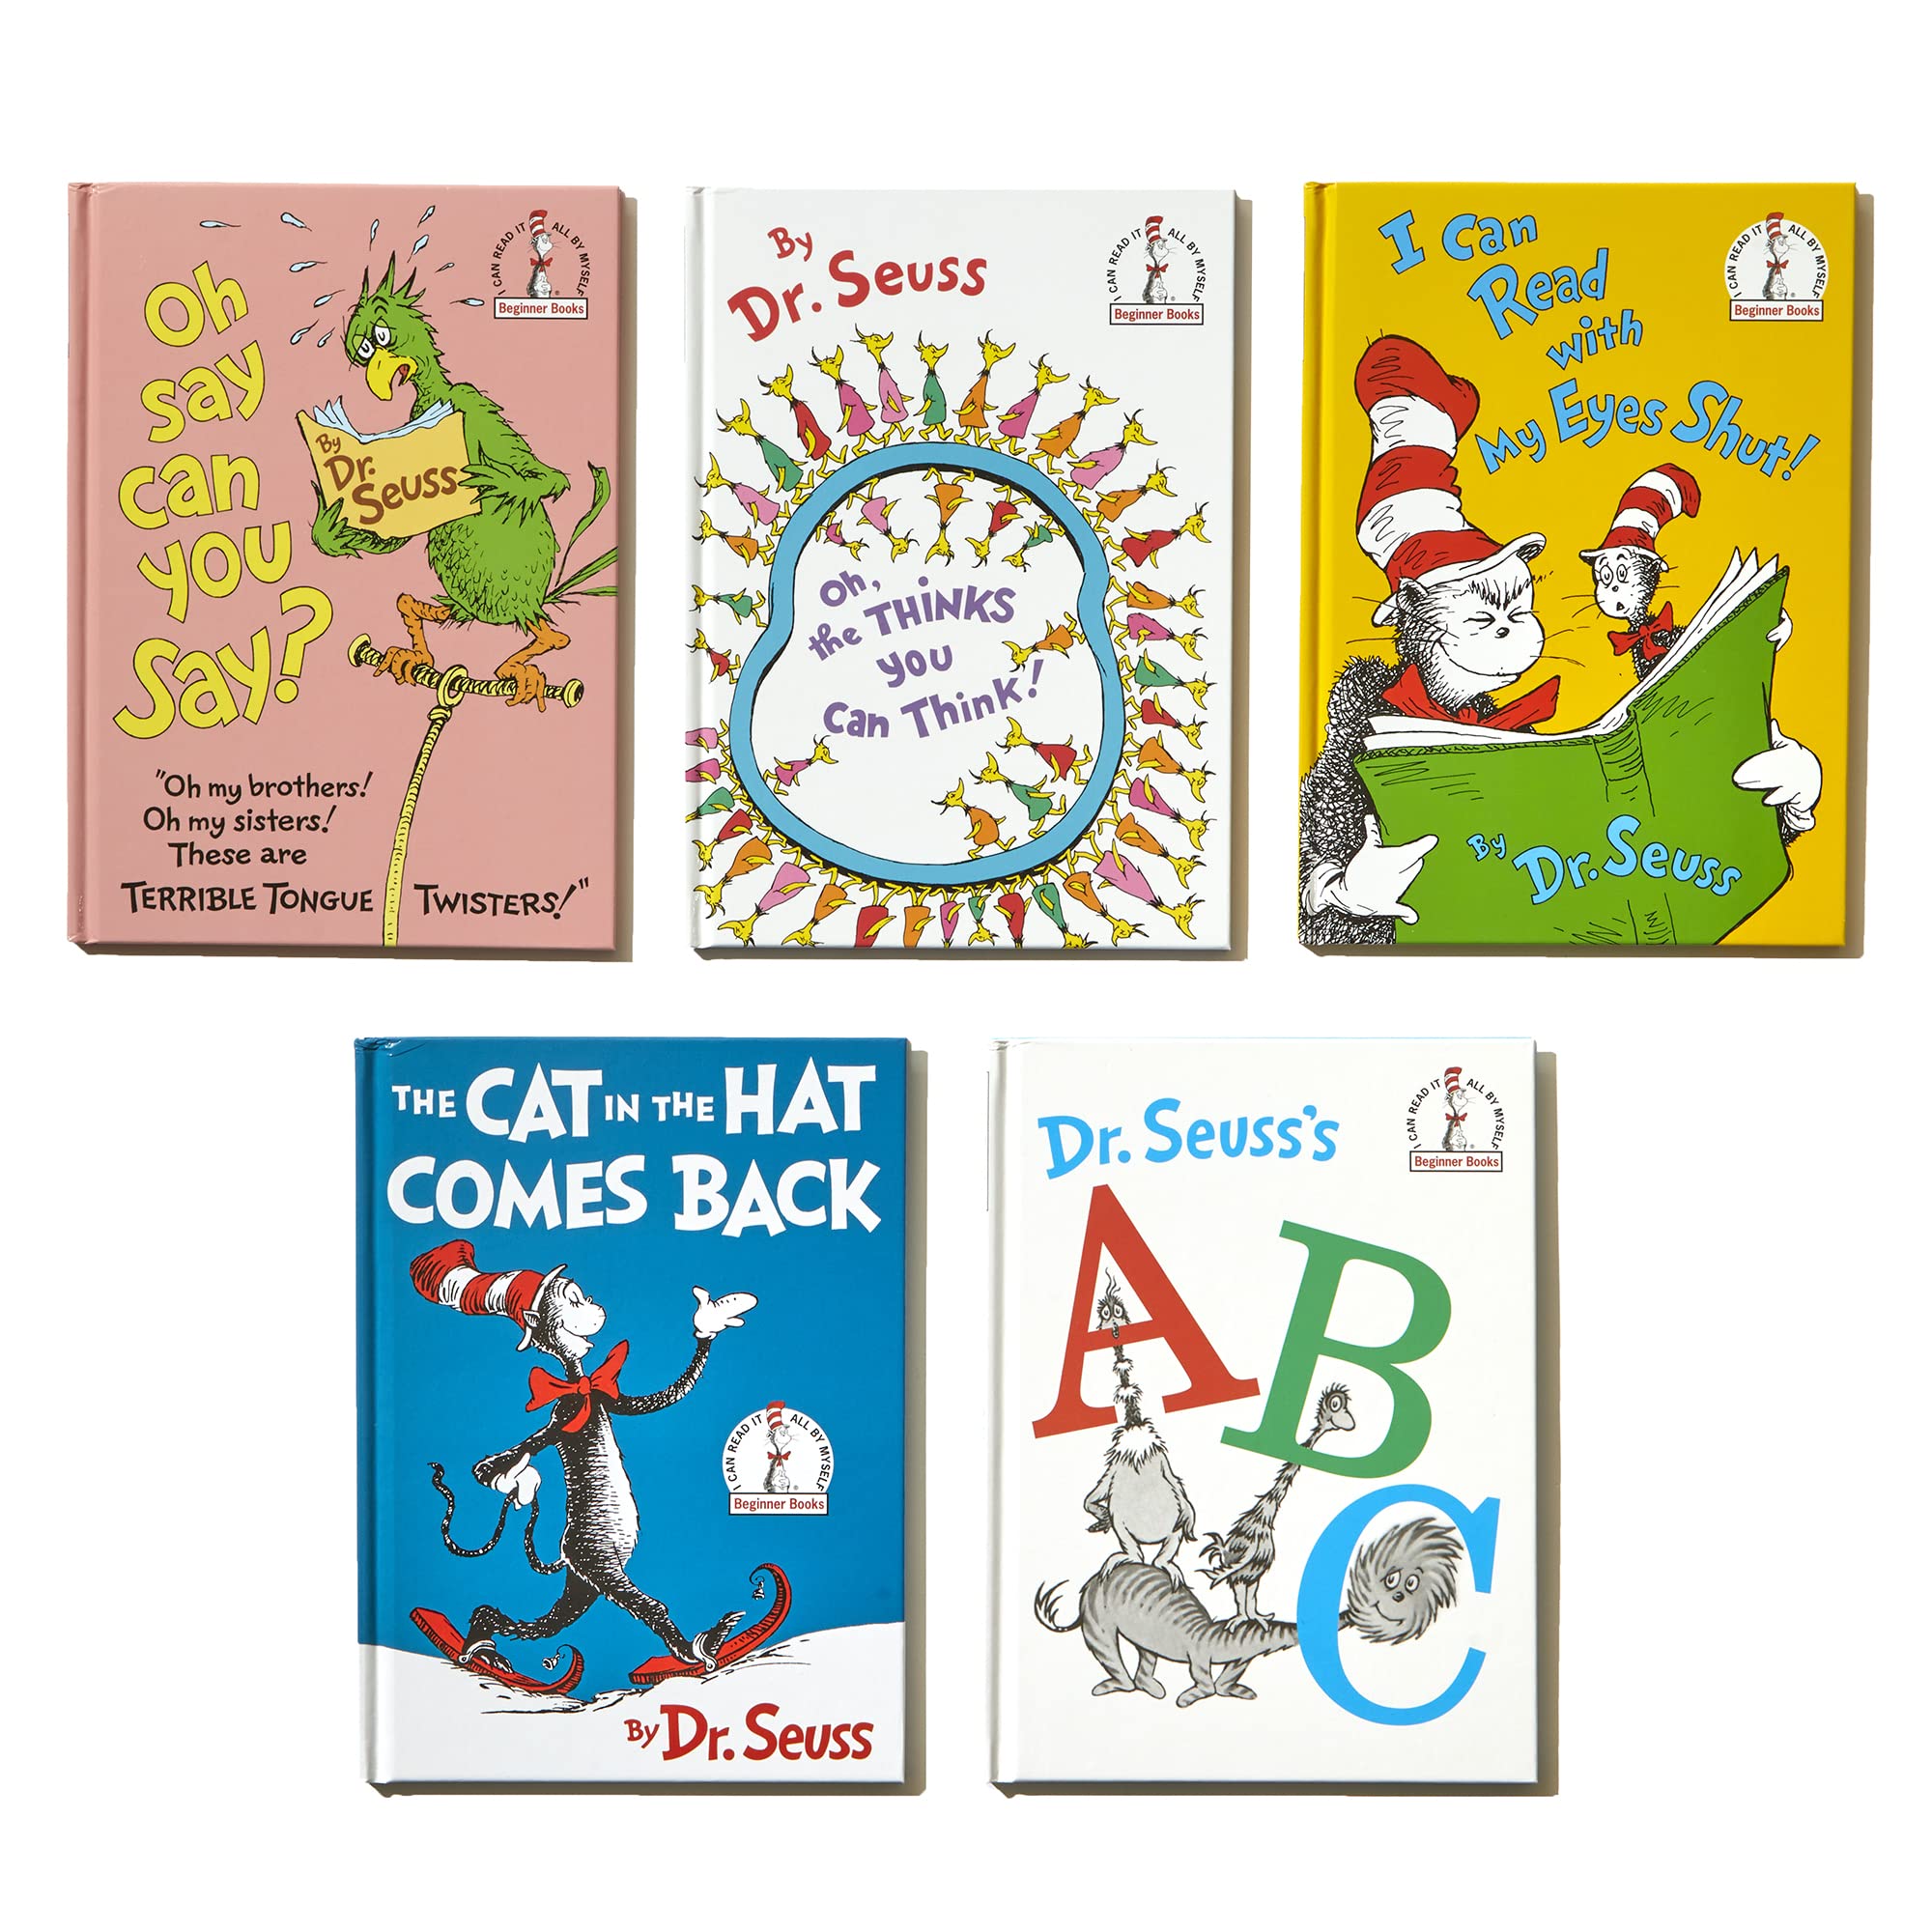 Dr. Seuss's Second Beginner Book Collection: The Cat in the Hat Comes Back; Dr. Seuss's ABC; I Can Read with My Eyes Shut!; Oh, the Thinks You Can Think!; Oh Say Can You Say? (Beginner Books(R))